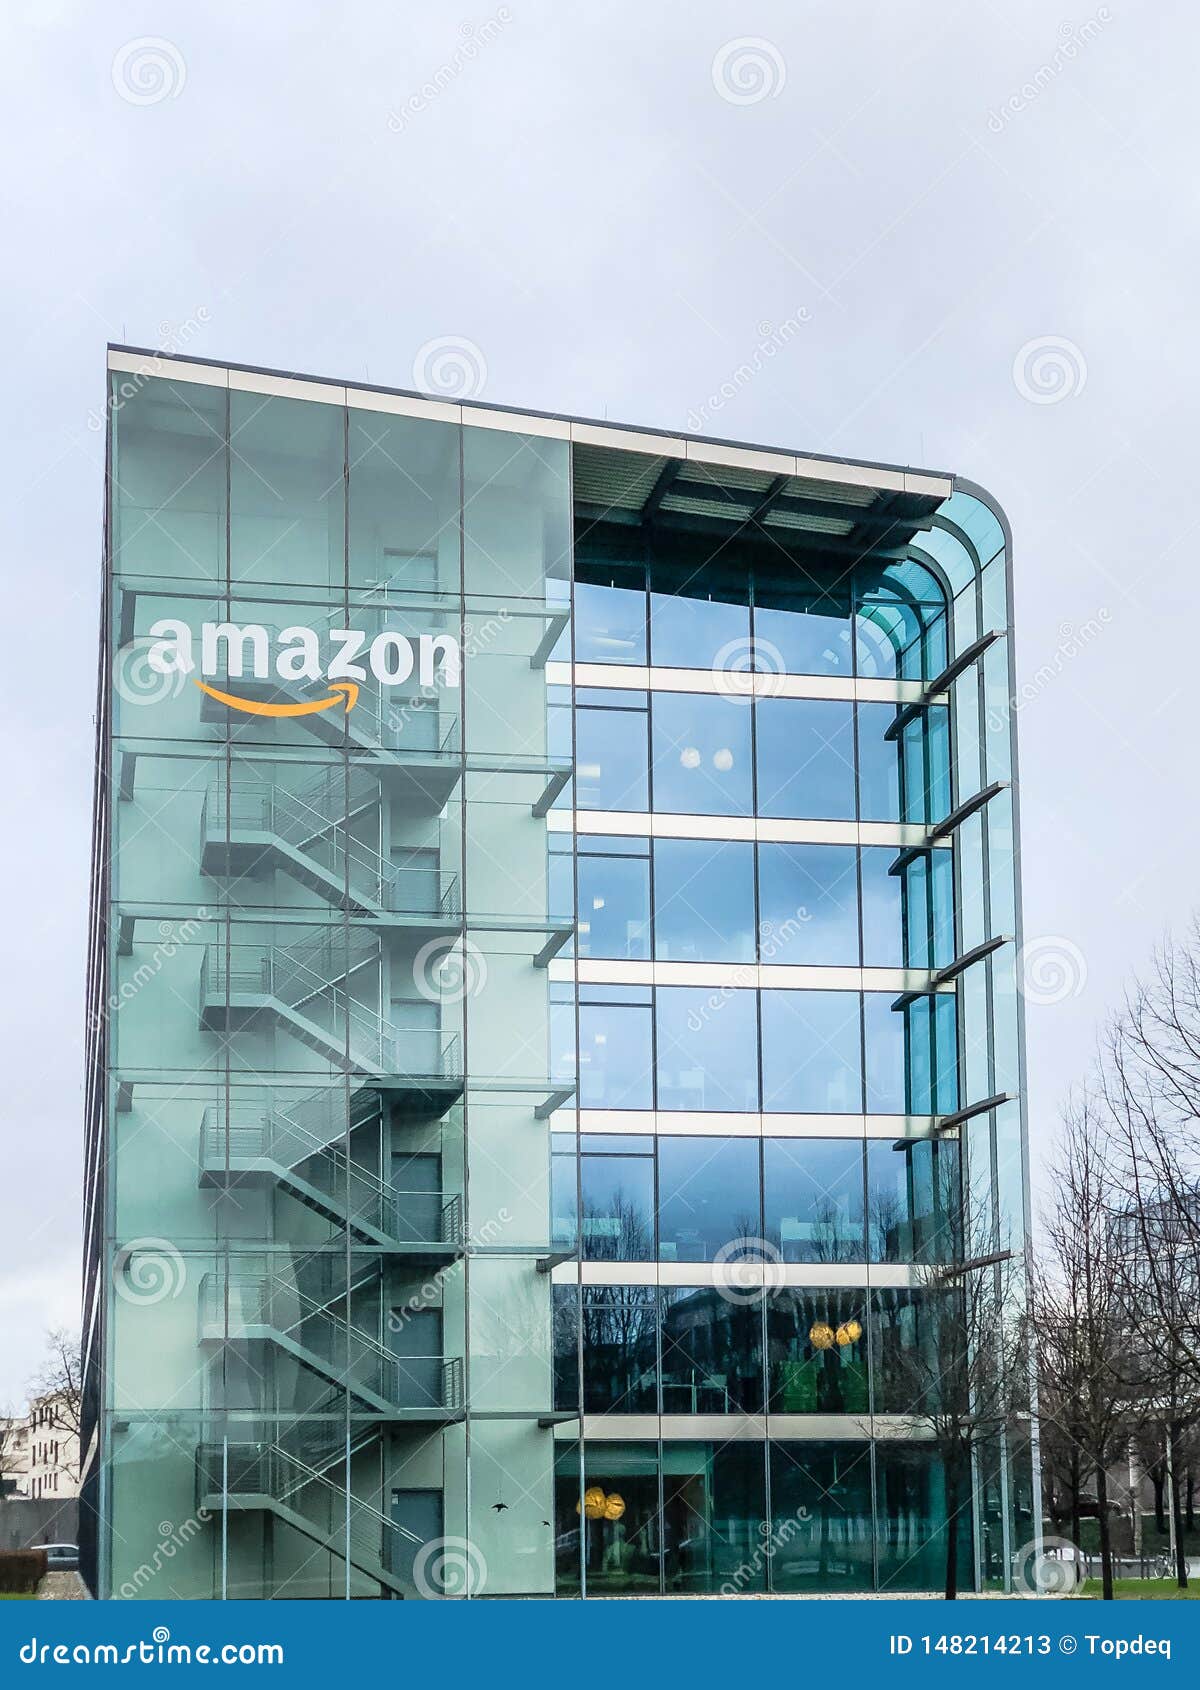 Amazon Logo at Office Building, Munich Germany Editorial Stock Photo -  Image of company, brand: 148214213